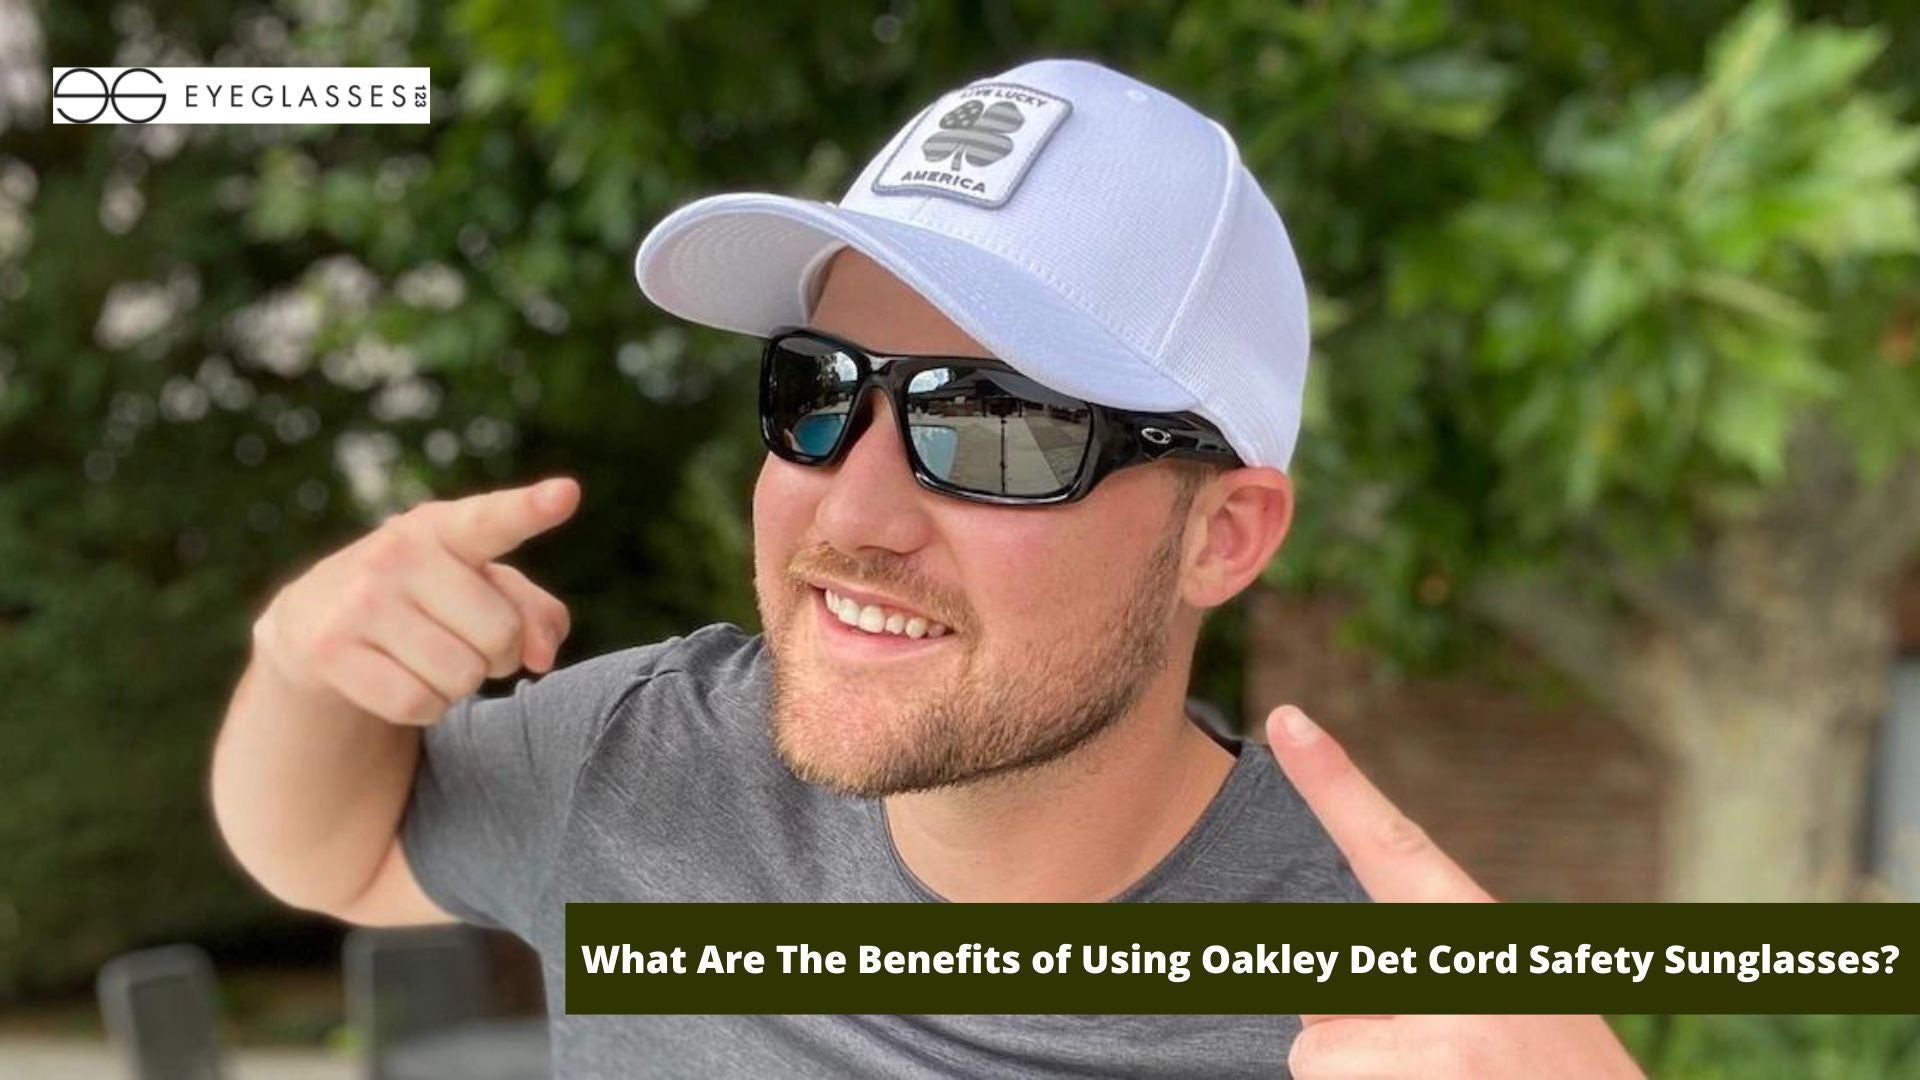 What Are The Benefits of Using Oakley Det Cord Safety Sunglasses?